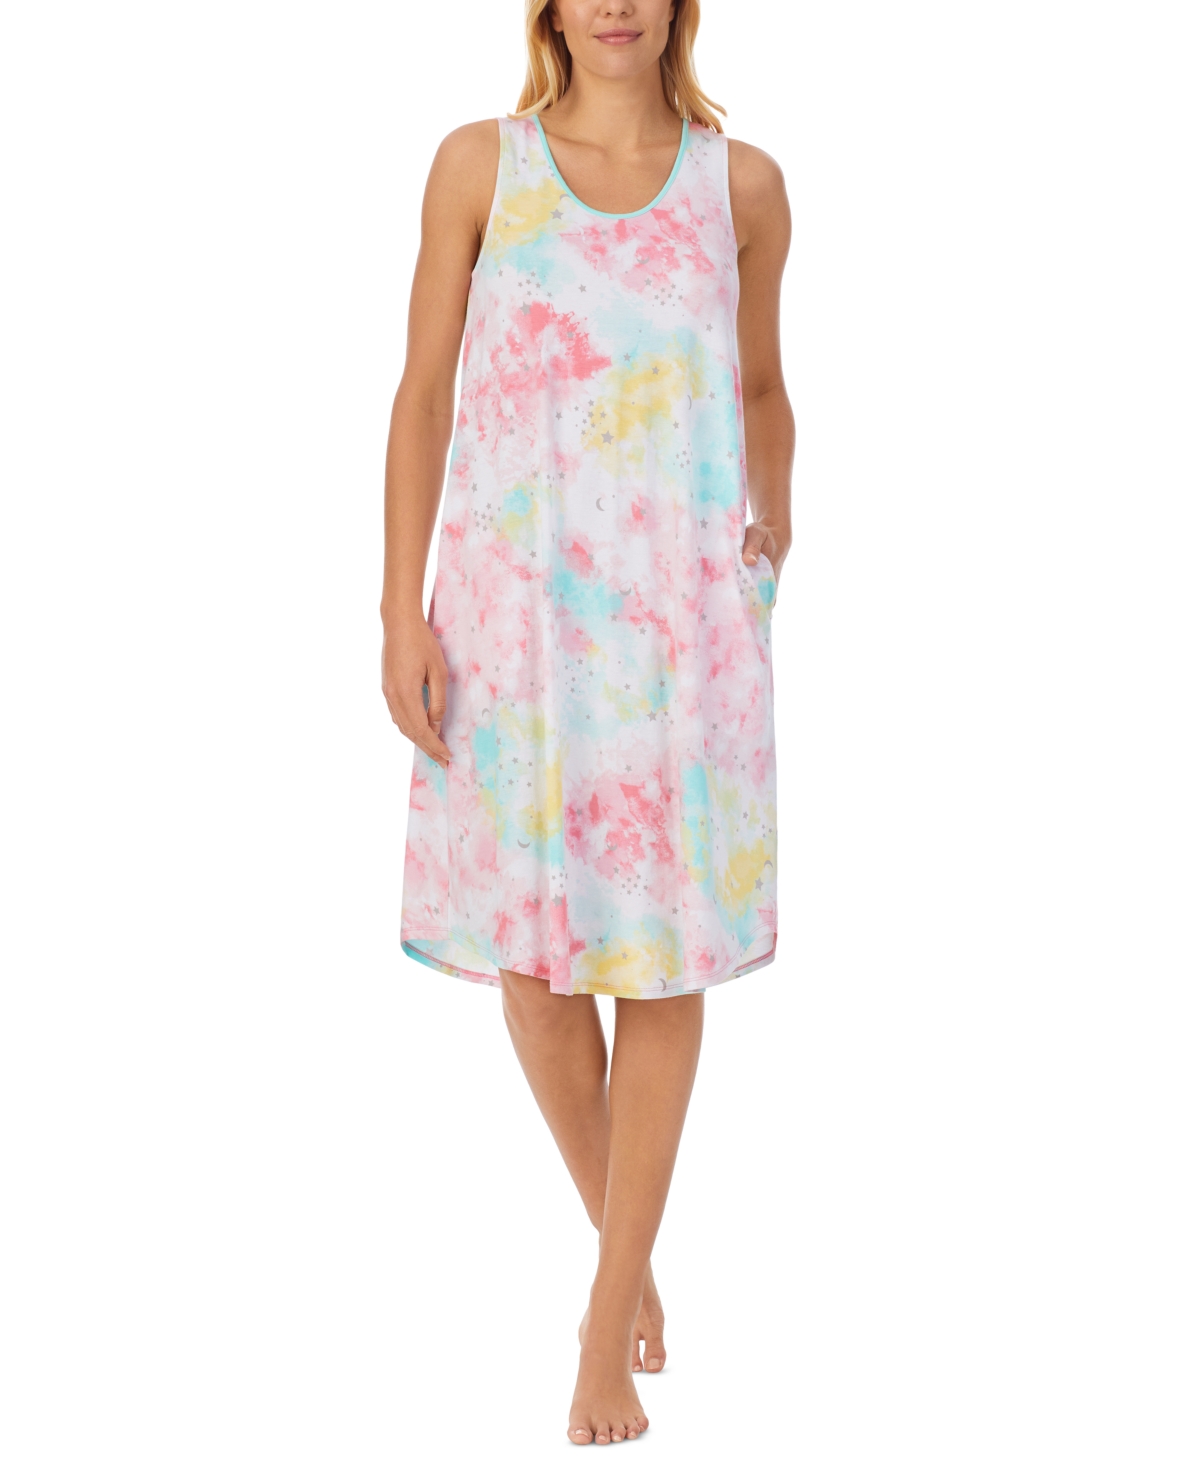 Cuddl Duds Women's Printed Sleeveless Open-Back Nightgown